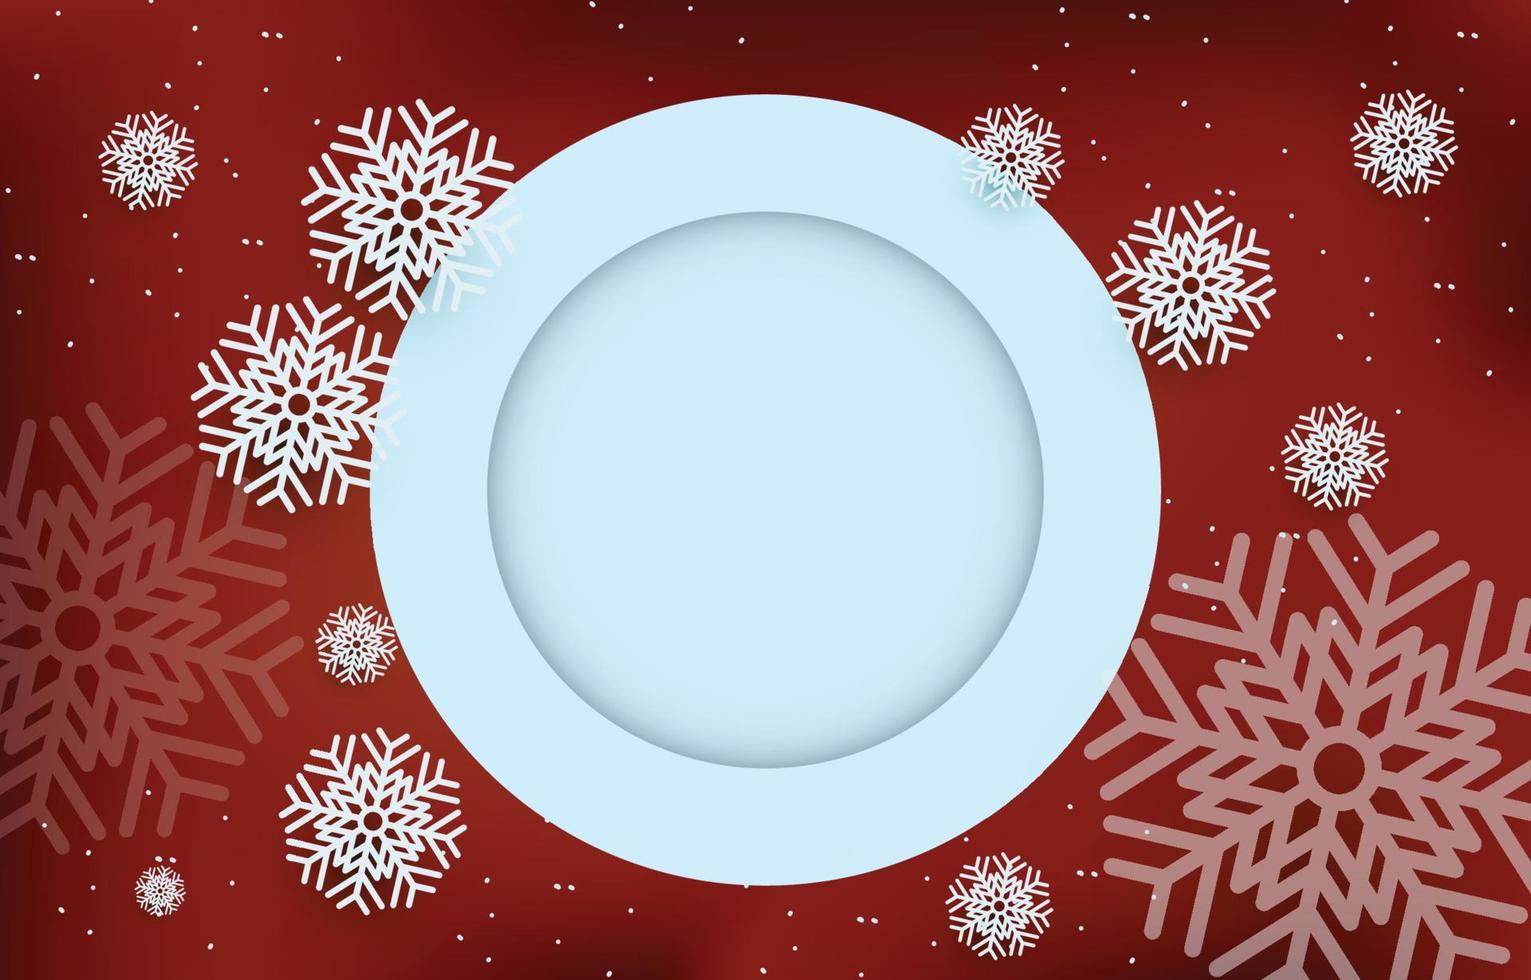 Dark red background with blank circle frame decorated with snowflakes, vector illustration of winter christmas and new year.